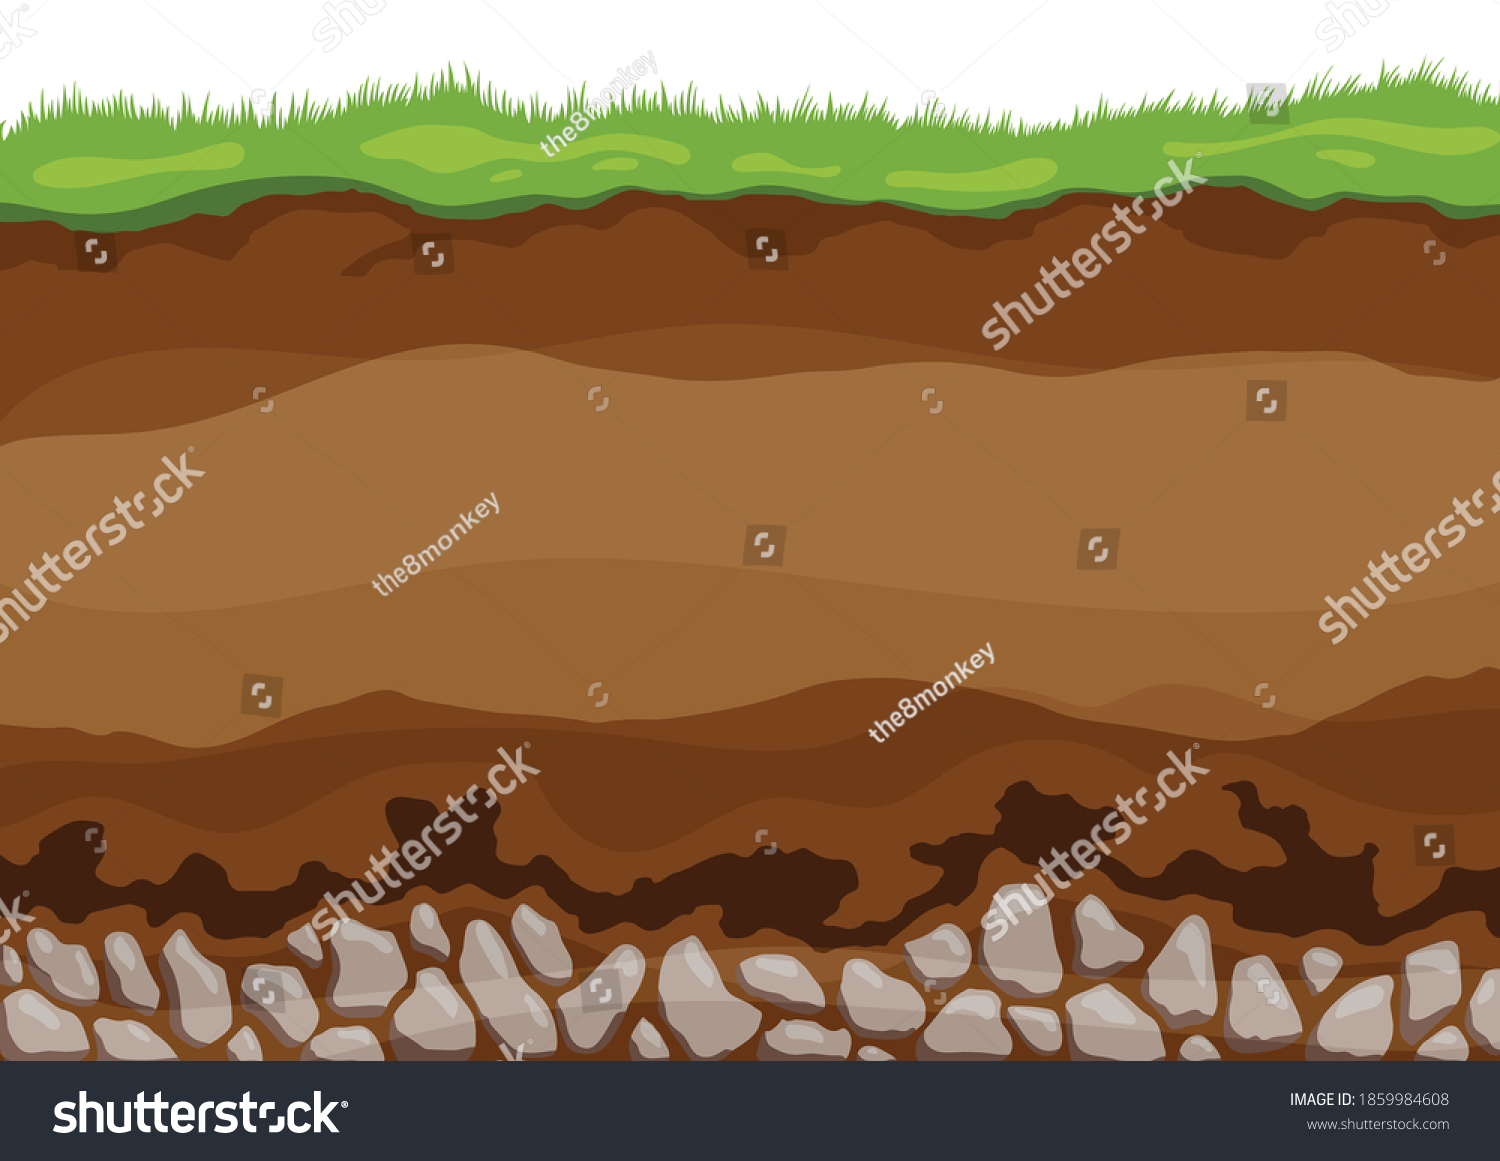 Soil layers vector